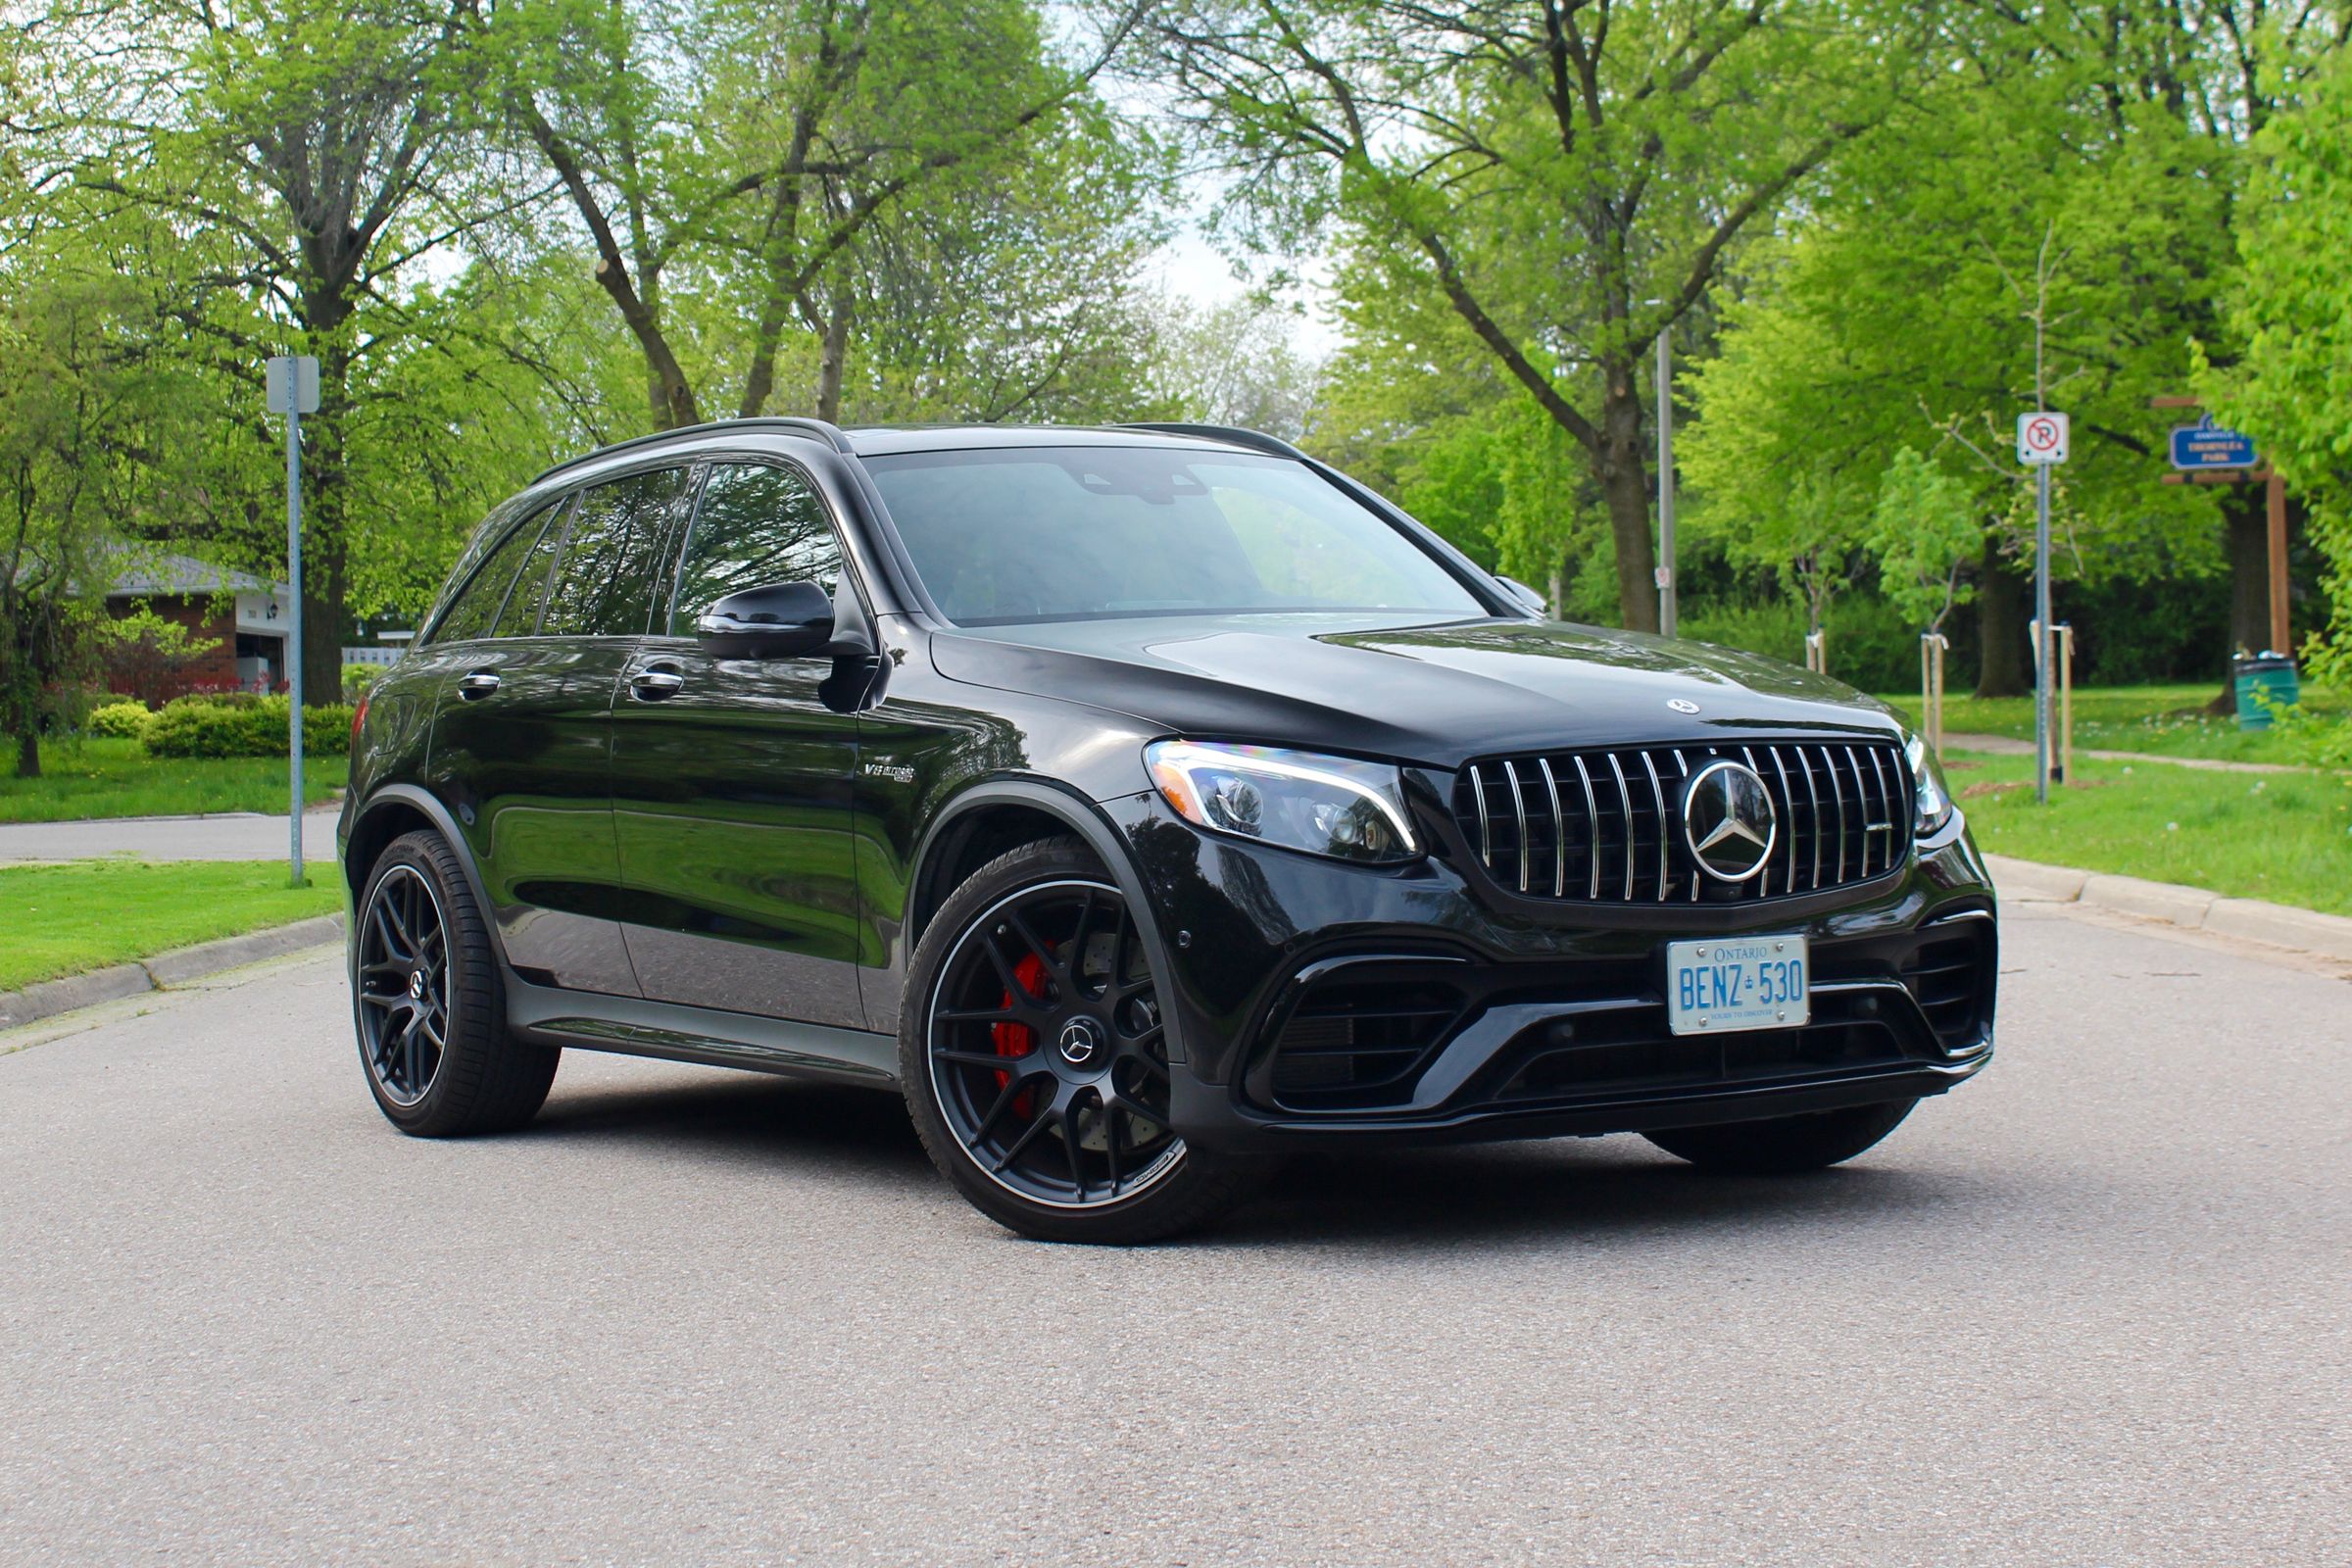 2019 Mercedes-Benz GLC : the kind of luxury we expect from Mercedes